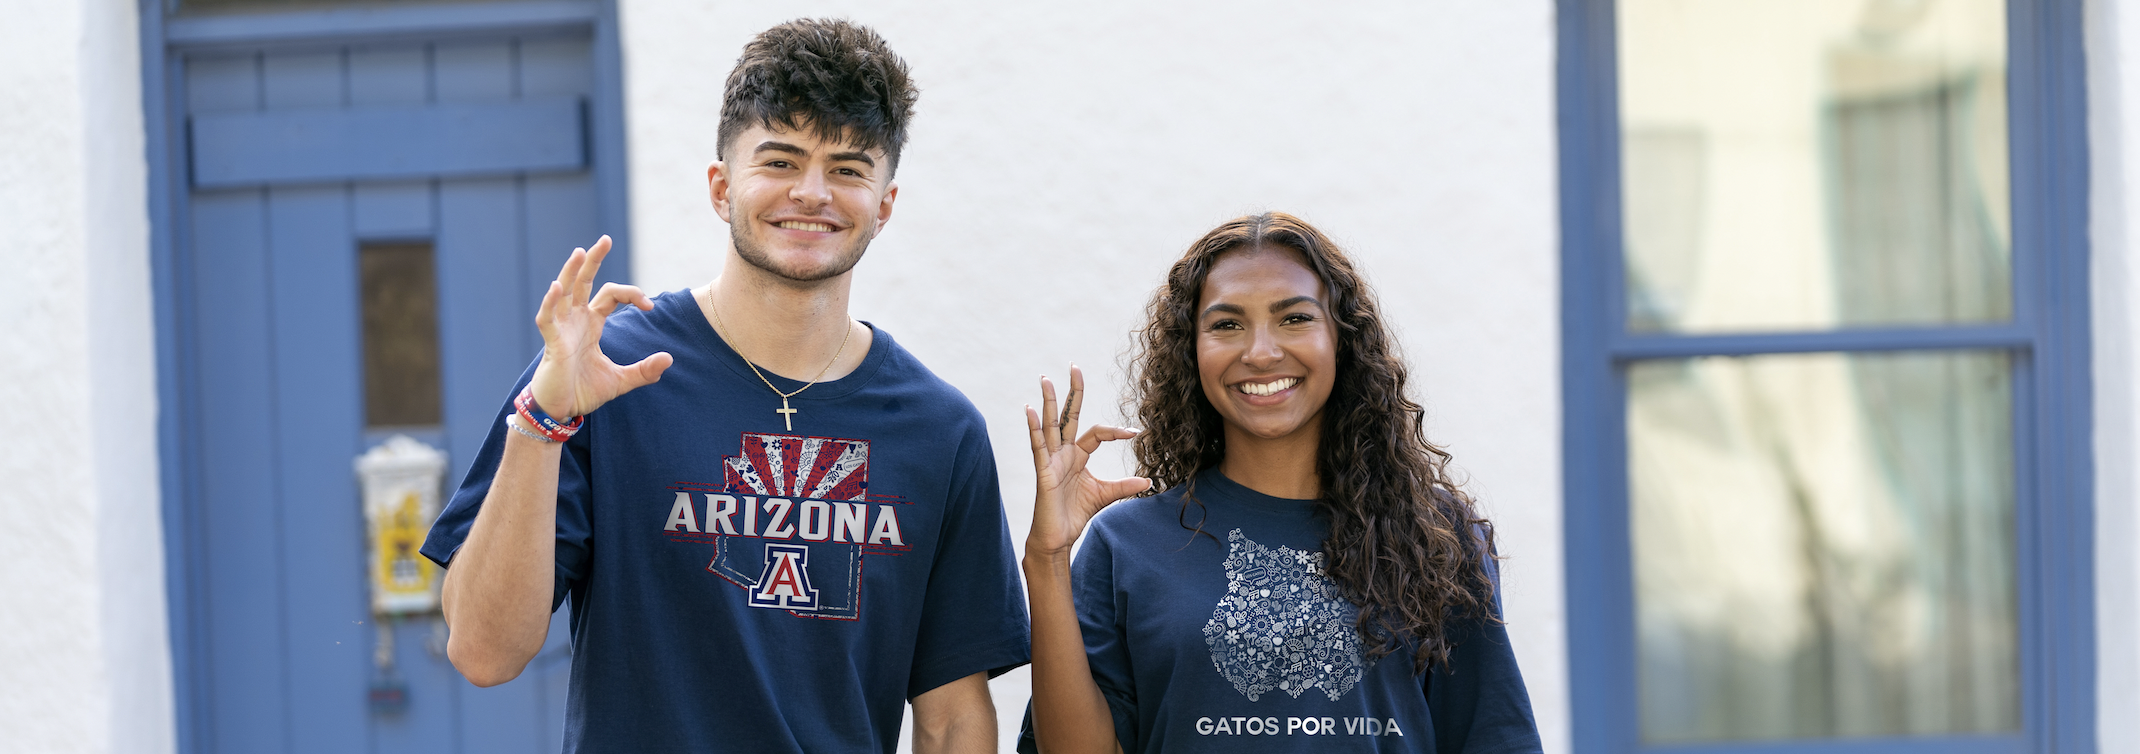 A boy and girl student in University of Arizona t-shirts holding up the Wildcats hand sign.